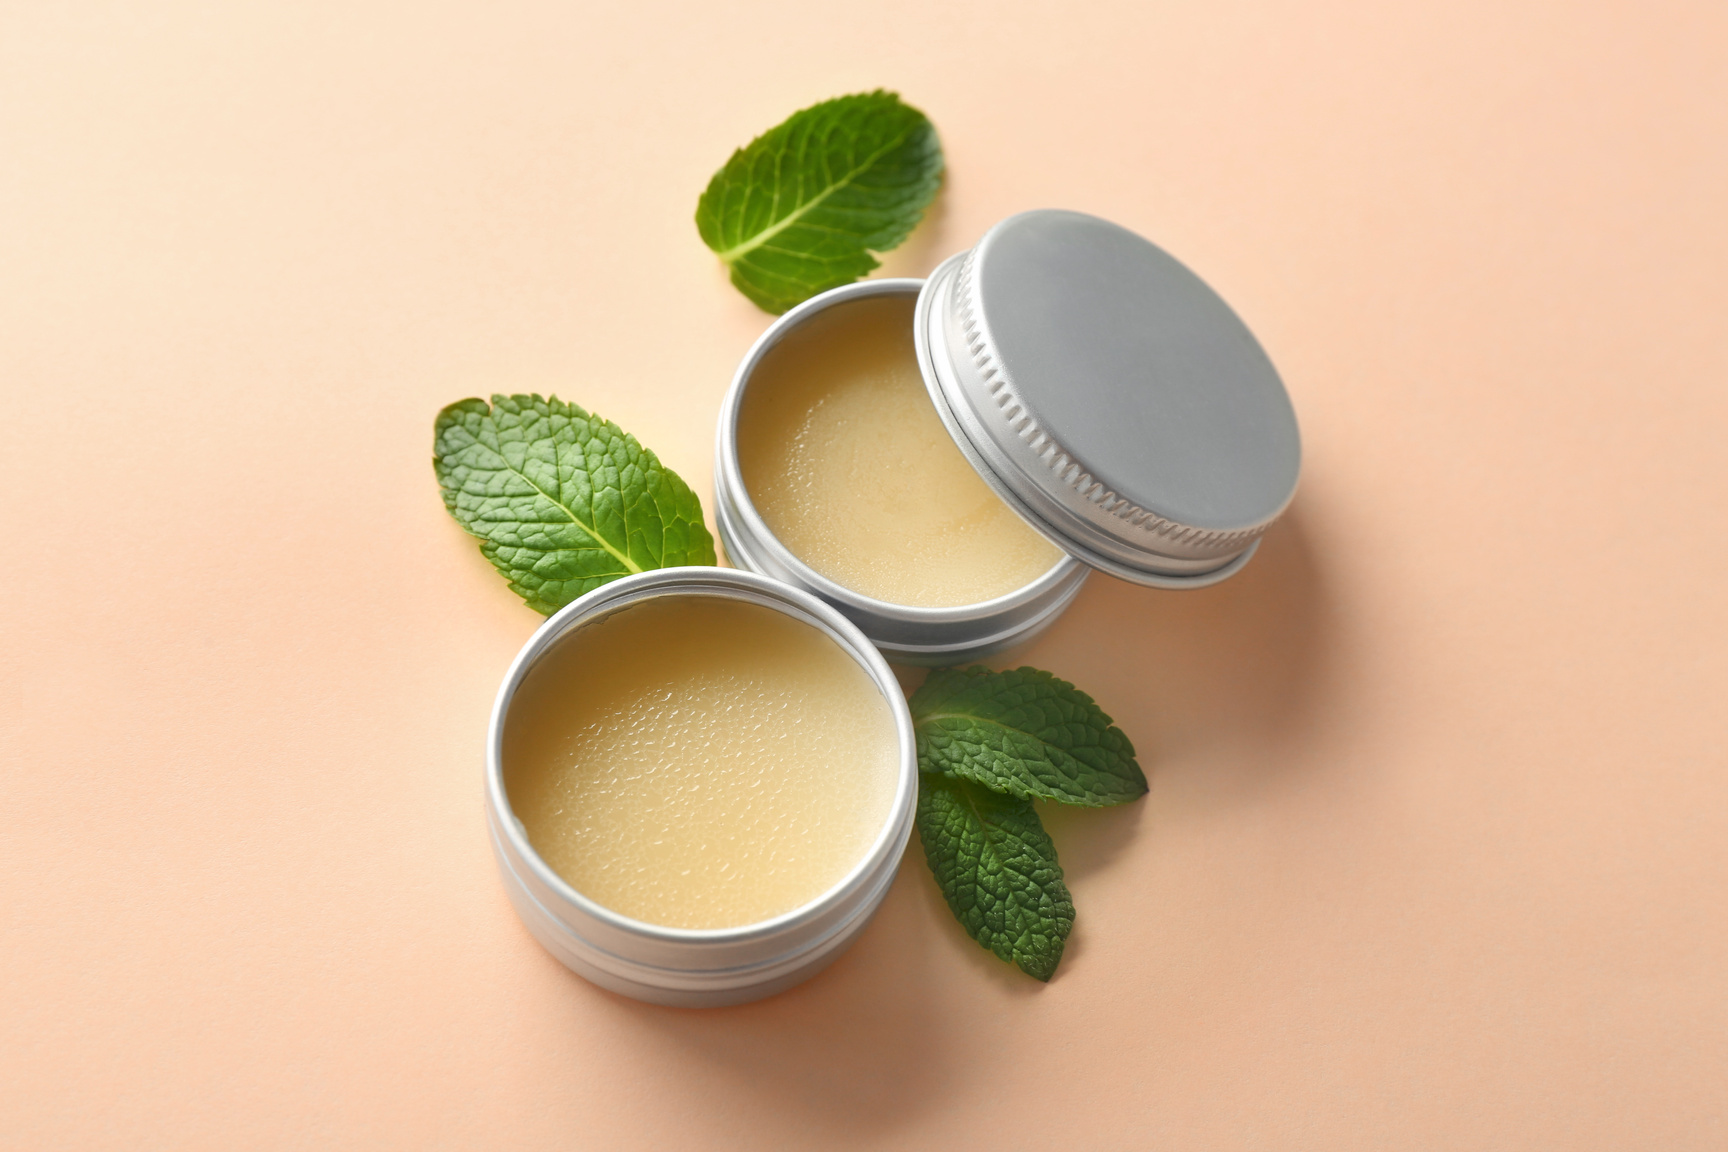 Containers with Lemon Balm Salve and Leaves on  Light Background